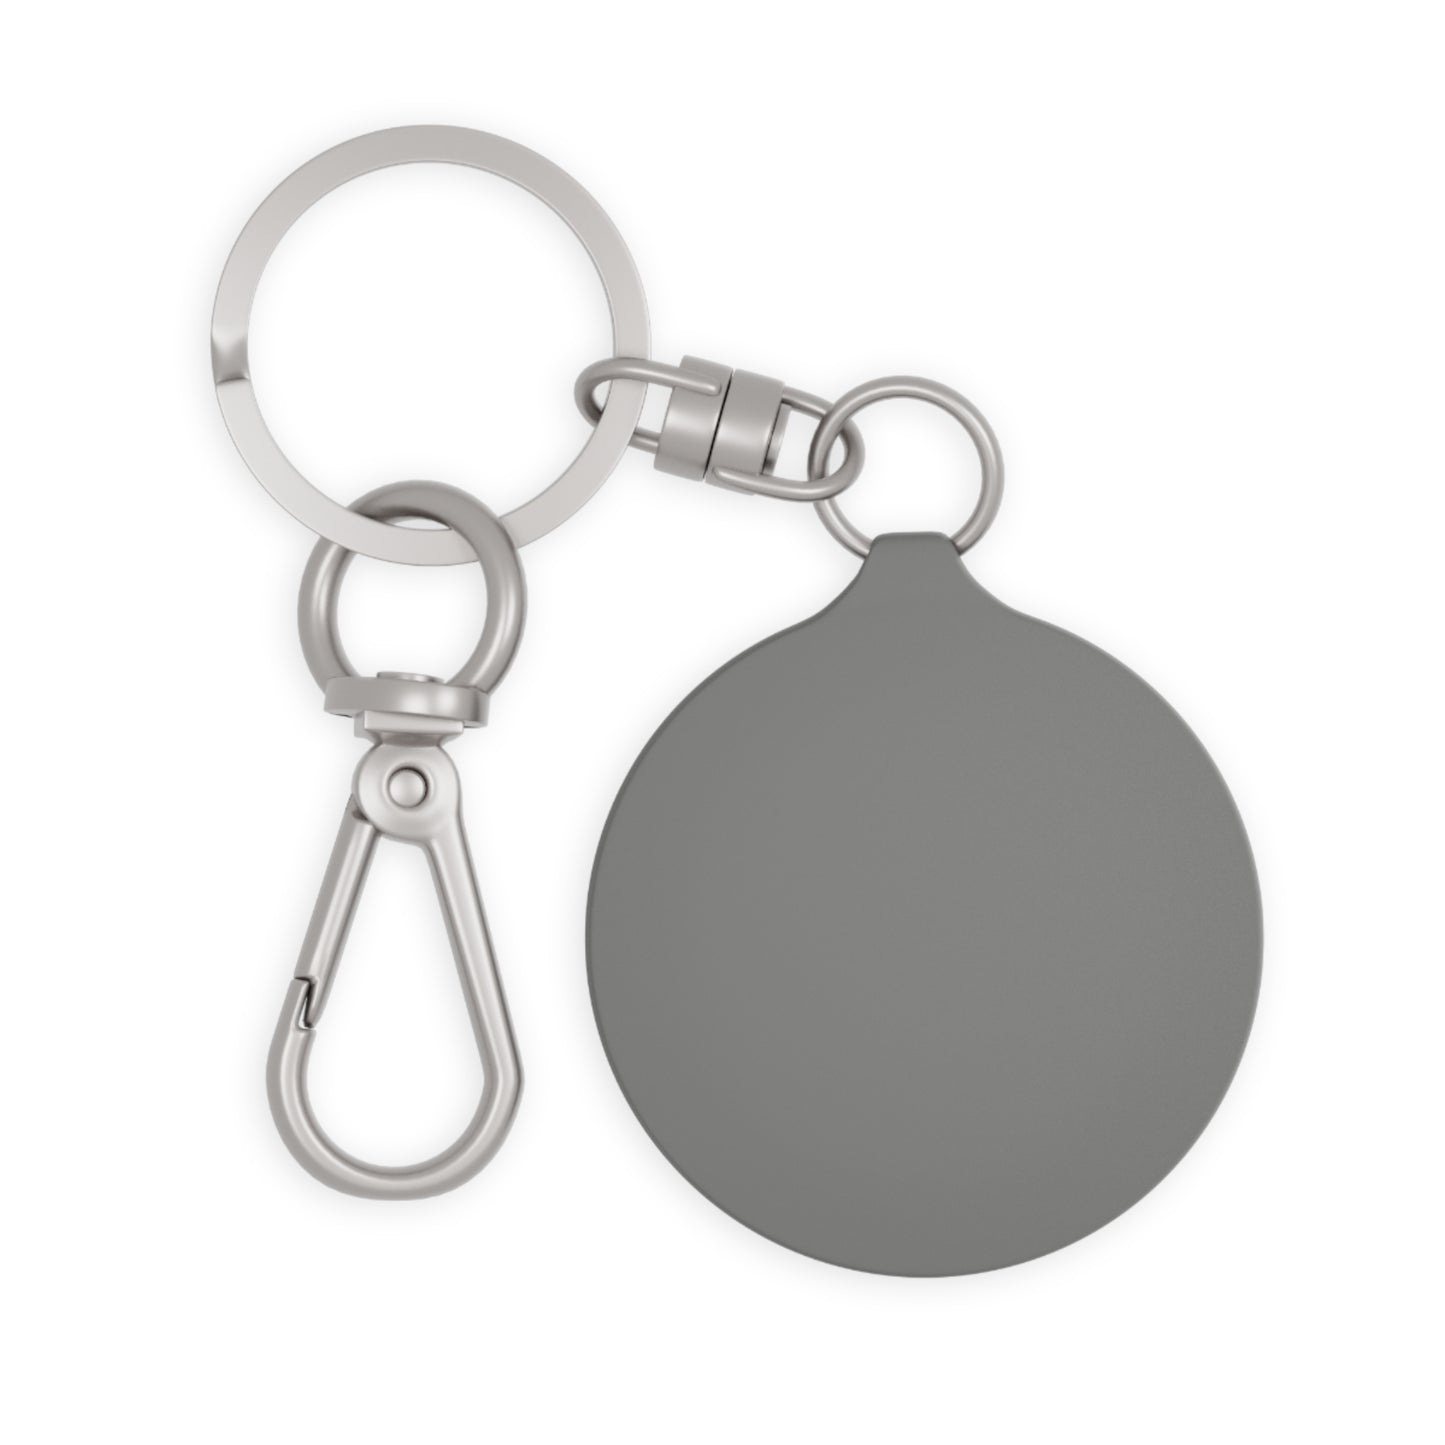 EverGrow Keyring Tag with black background with EverGrow and logo in gray - Worldwide